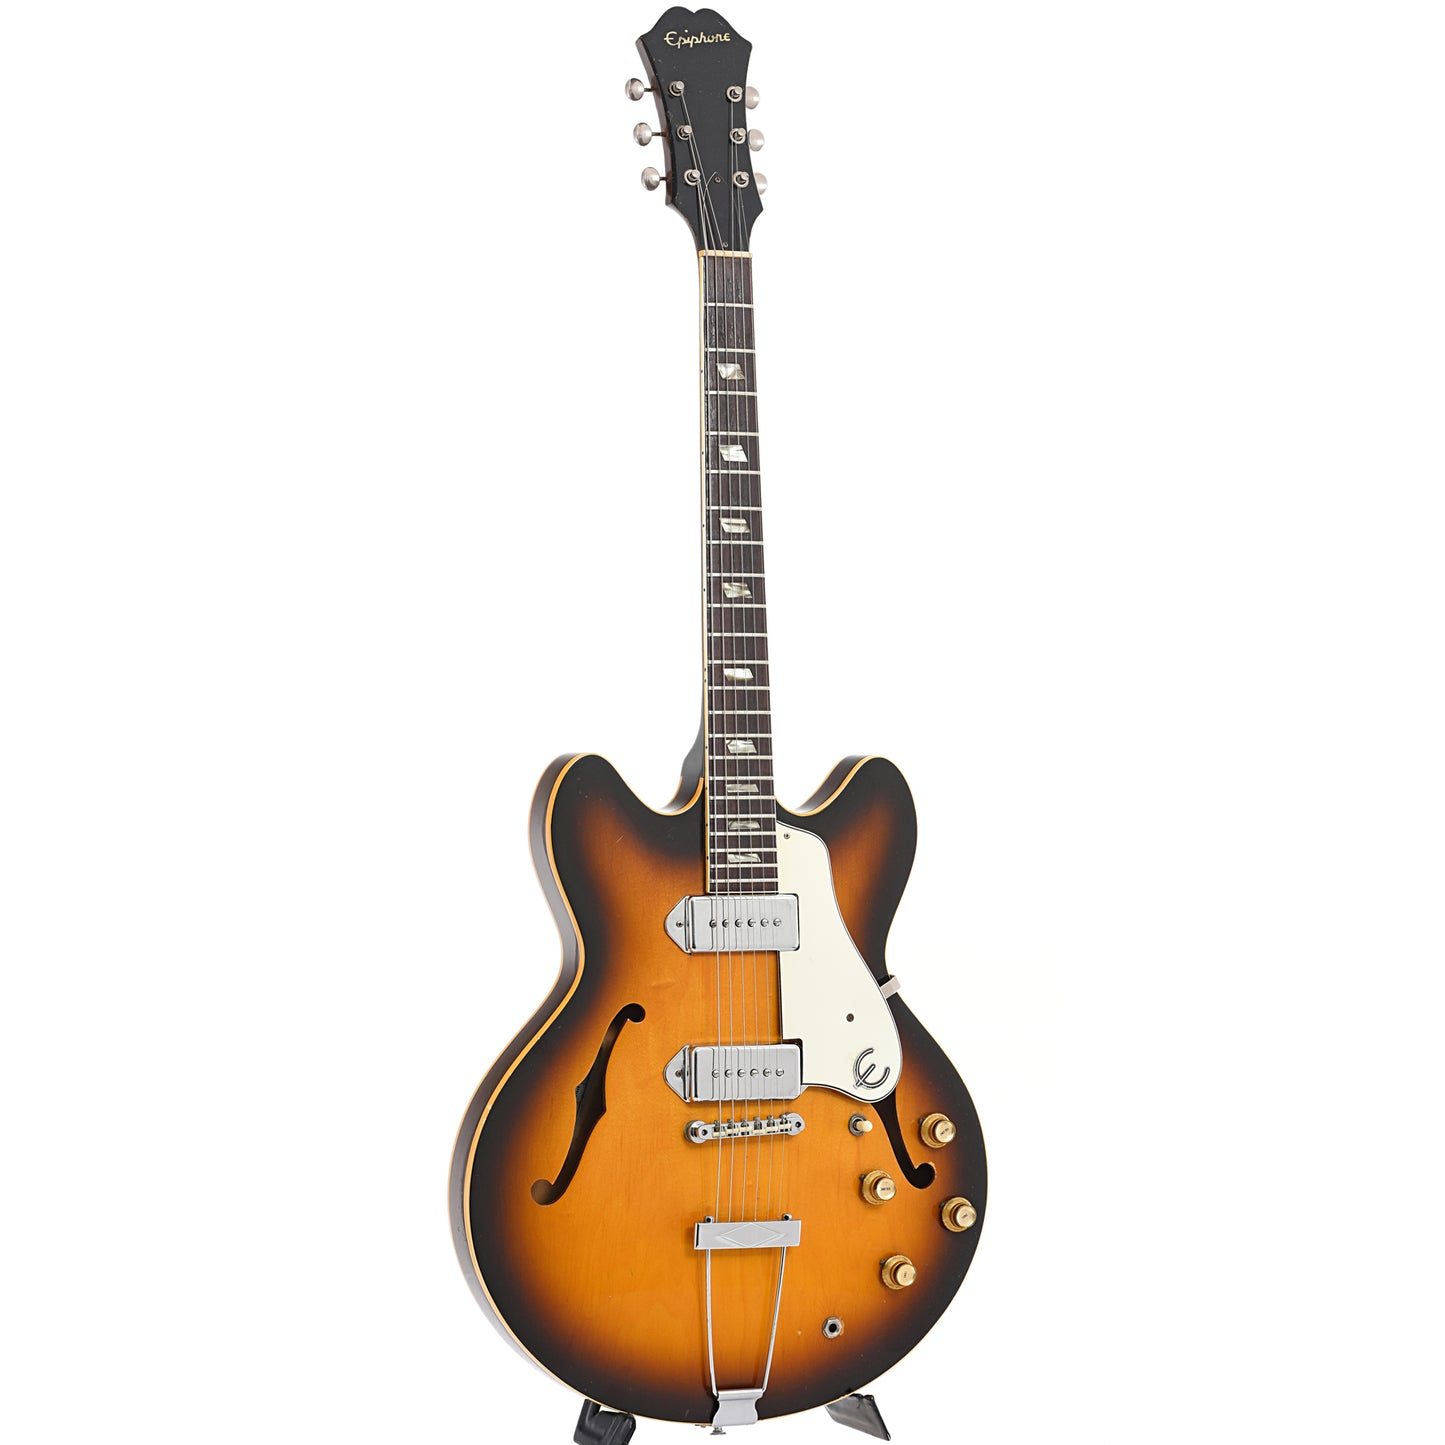 Full front and side of Epiphone E230TD Casino Hollow Body Electric Guitar (c.1966-69)